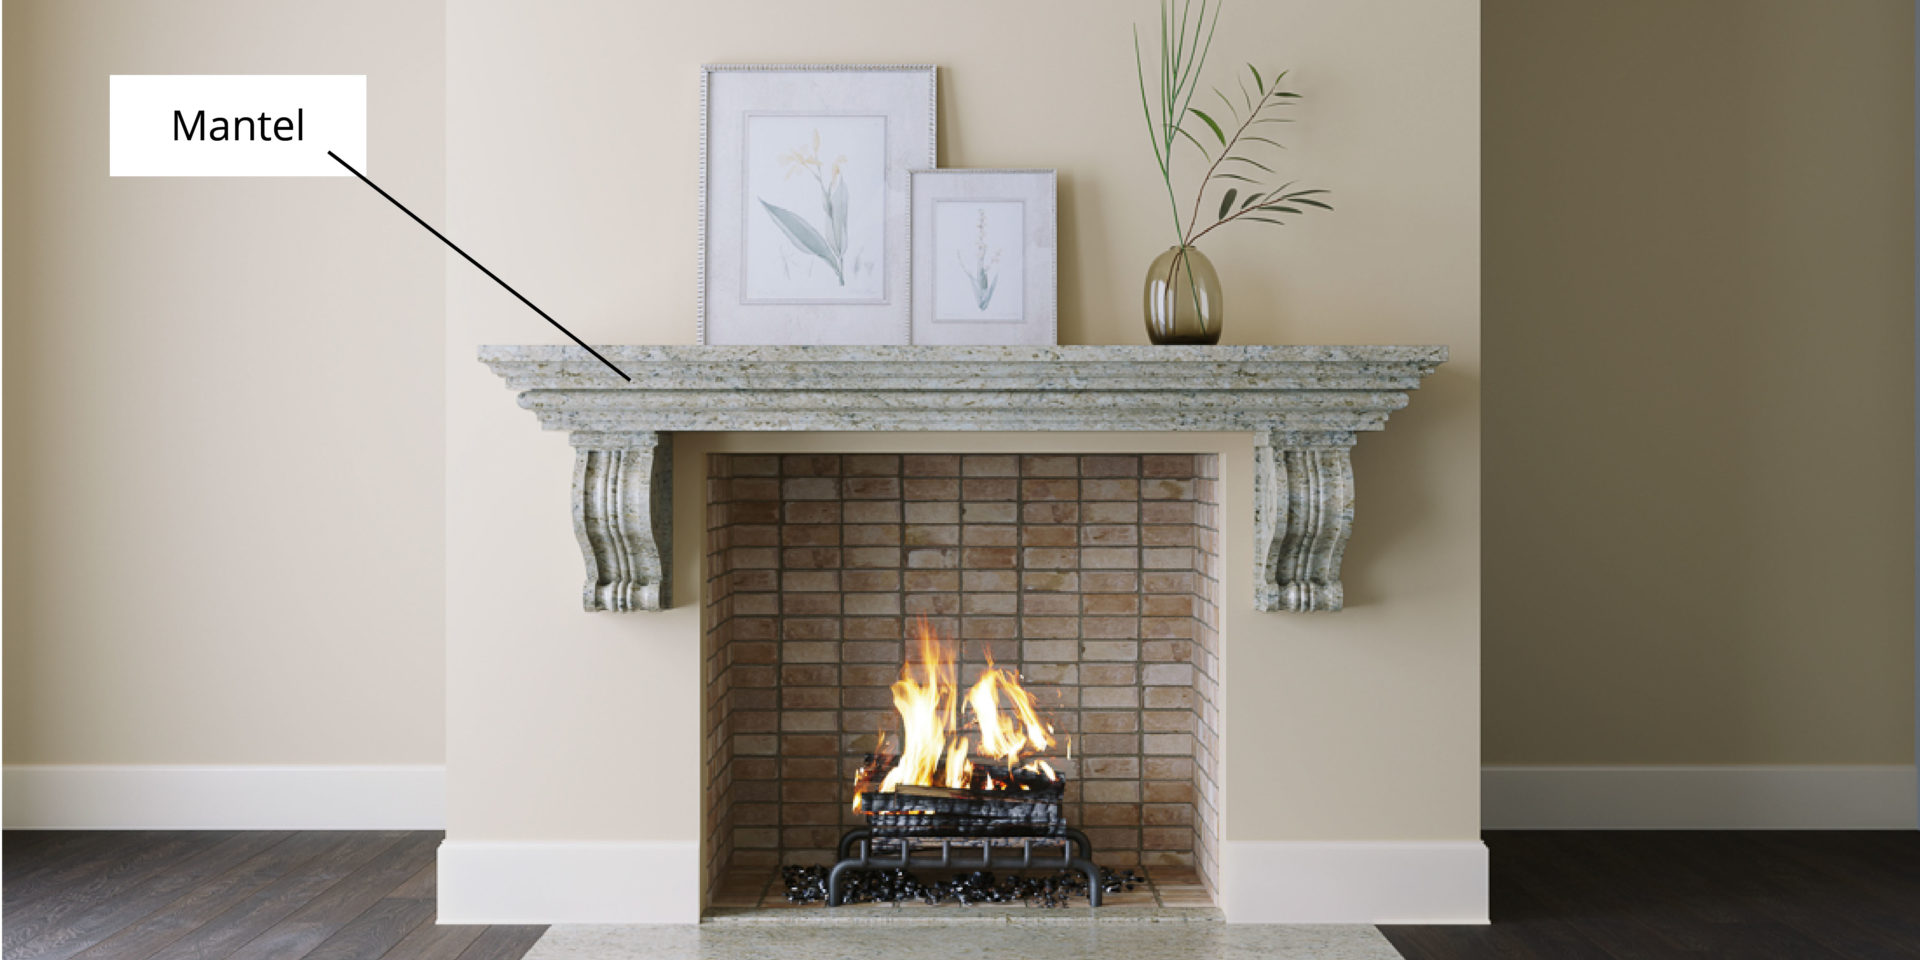 Fireplace Terms 101 The Ultimate Guide, What Is The Rack Inside A Fireplace Called